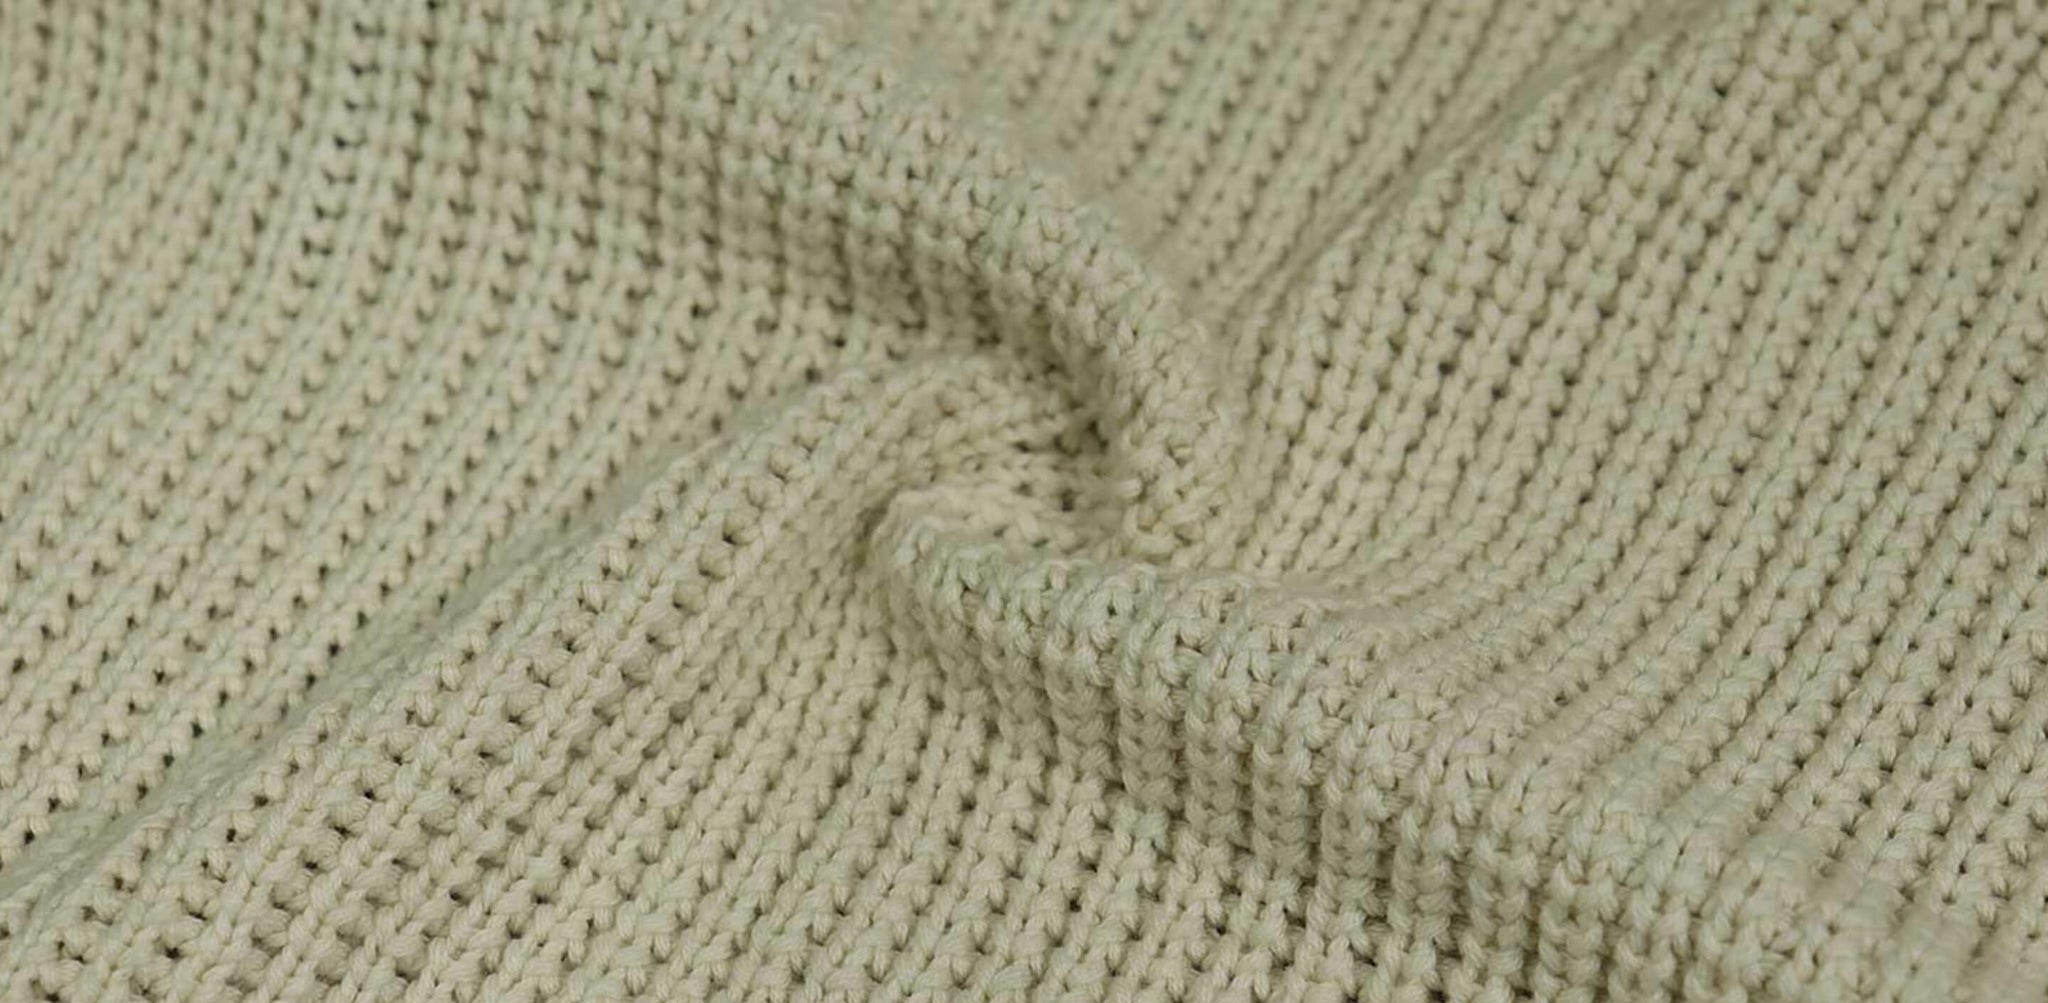 Wool Spandex Knit Jersey Fabric For Women Dress Stretchy Fabric